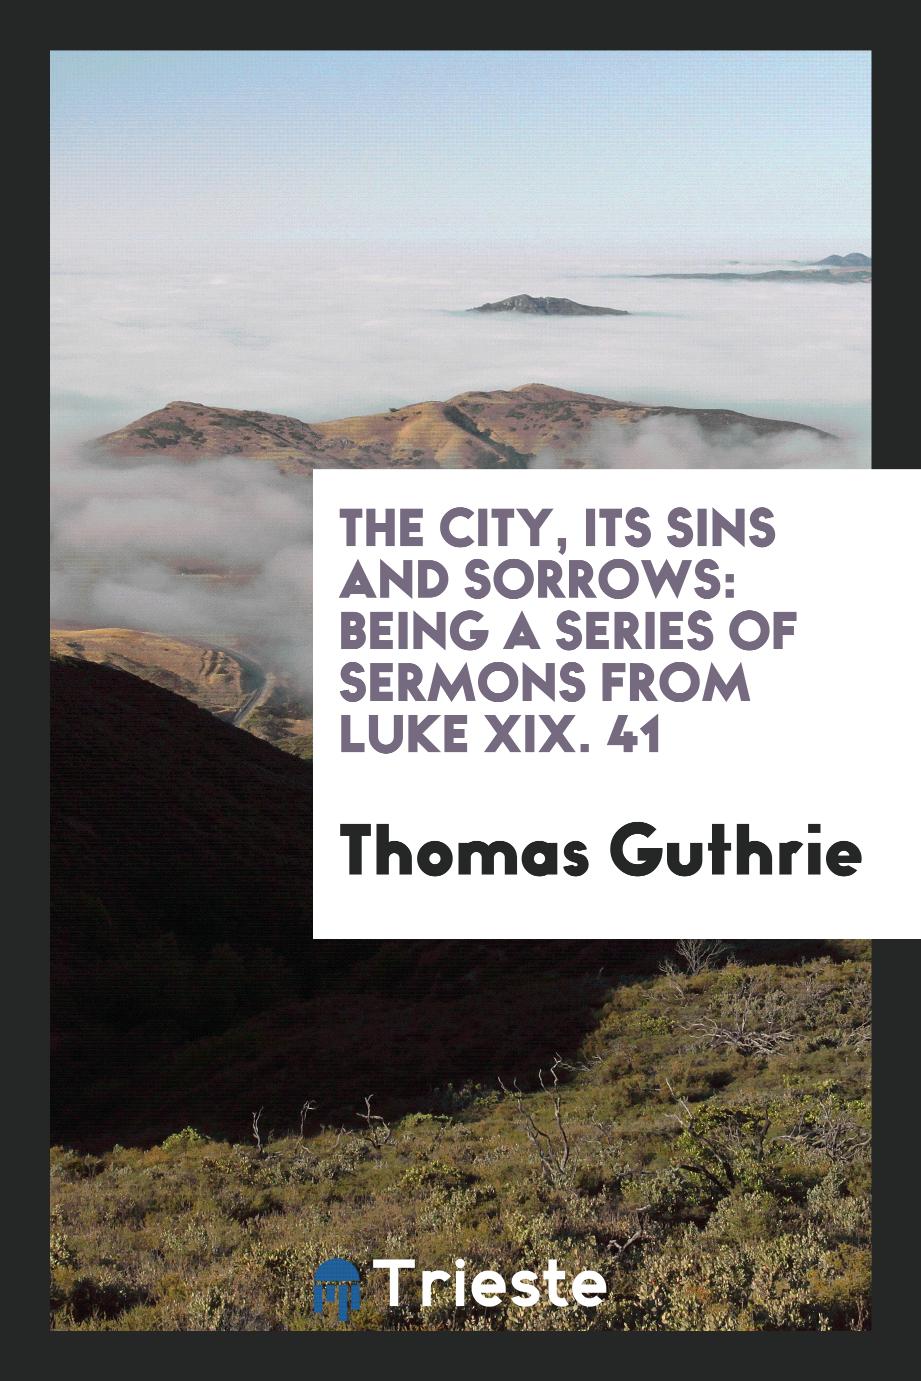 The city, its sins and sorrows: being a series of sermons from Luke XIX. 41